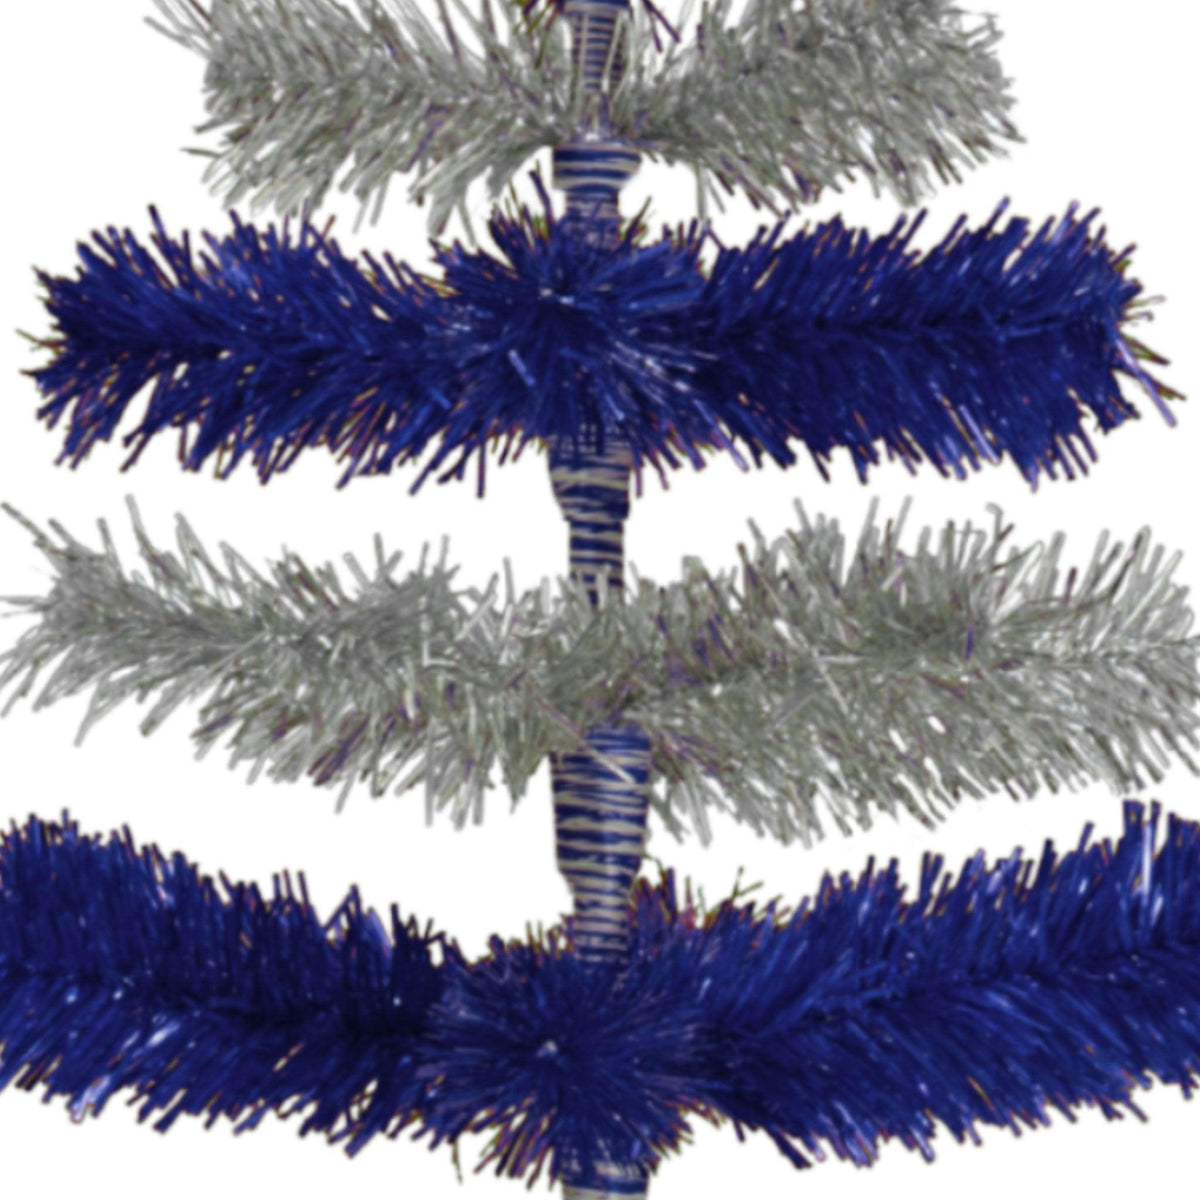 Metallic Blue and Shiny Silver Layered Tinsel Christmas Trees!    Decorate for the holidays with a Silver and Blue retro-style Christmas Tree.  Shop now at leedisplay.com